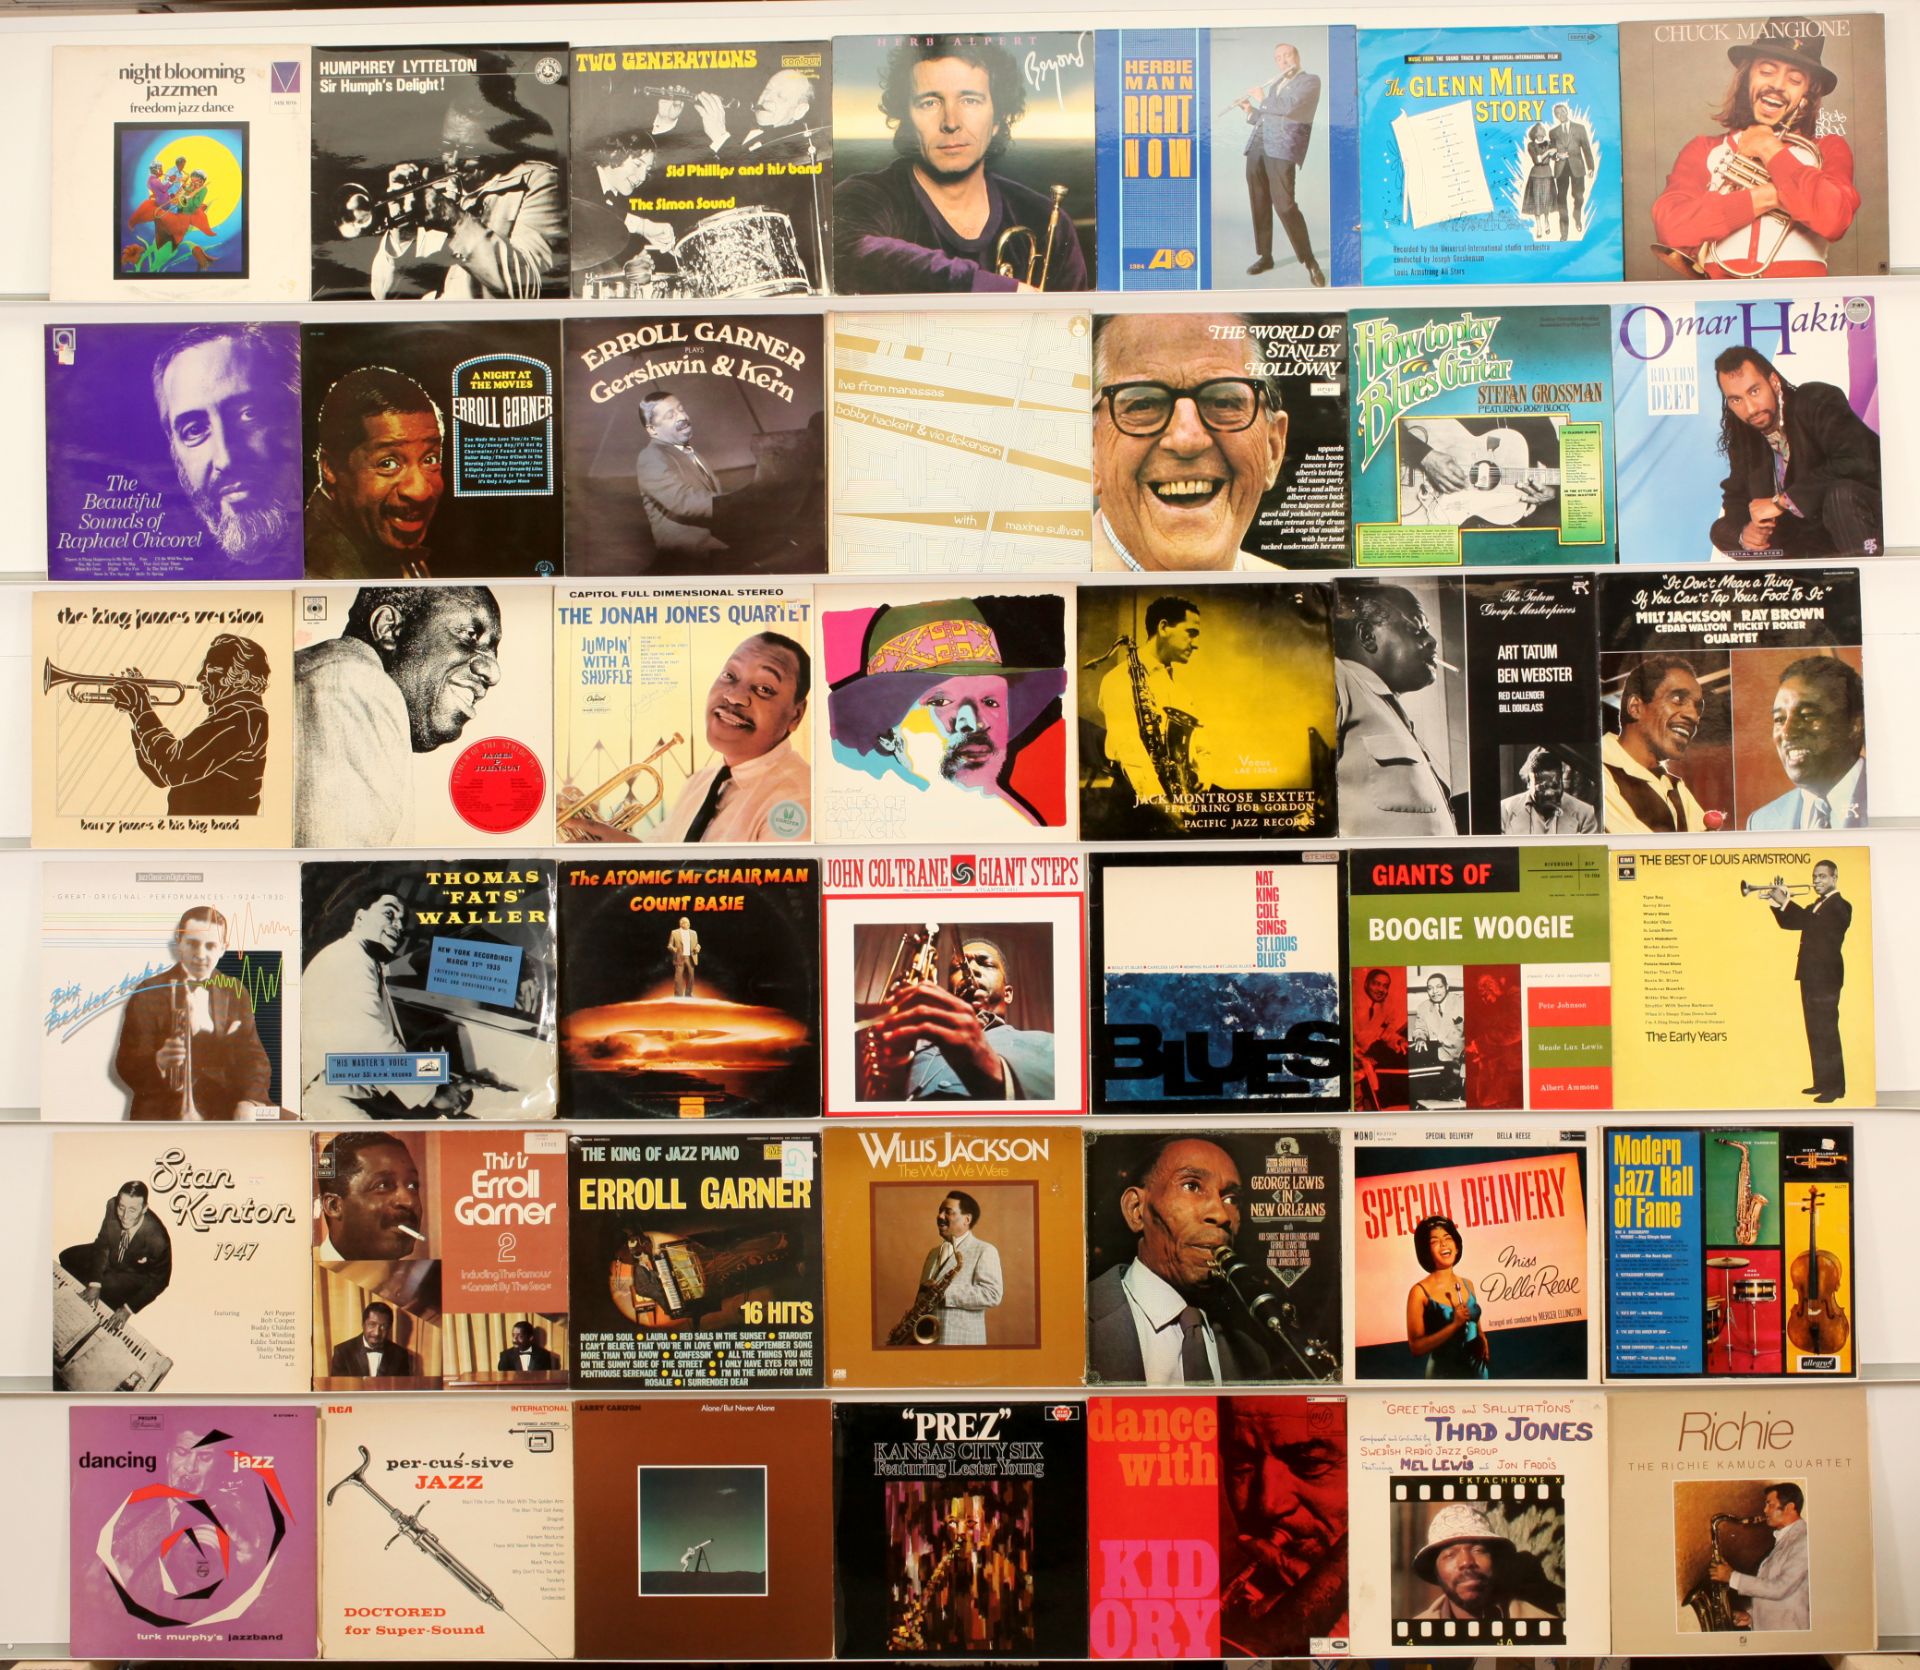 A Group of Jazz LPs